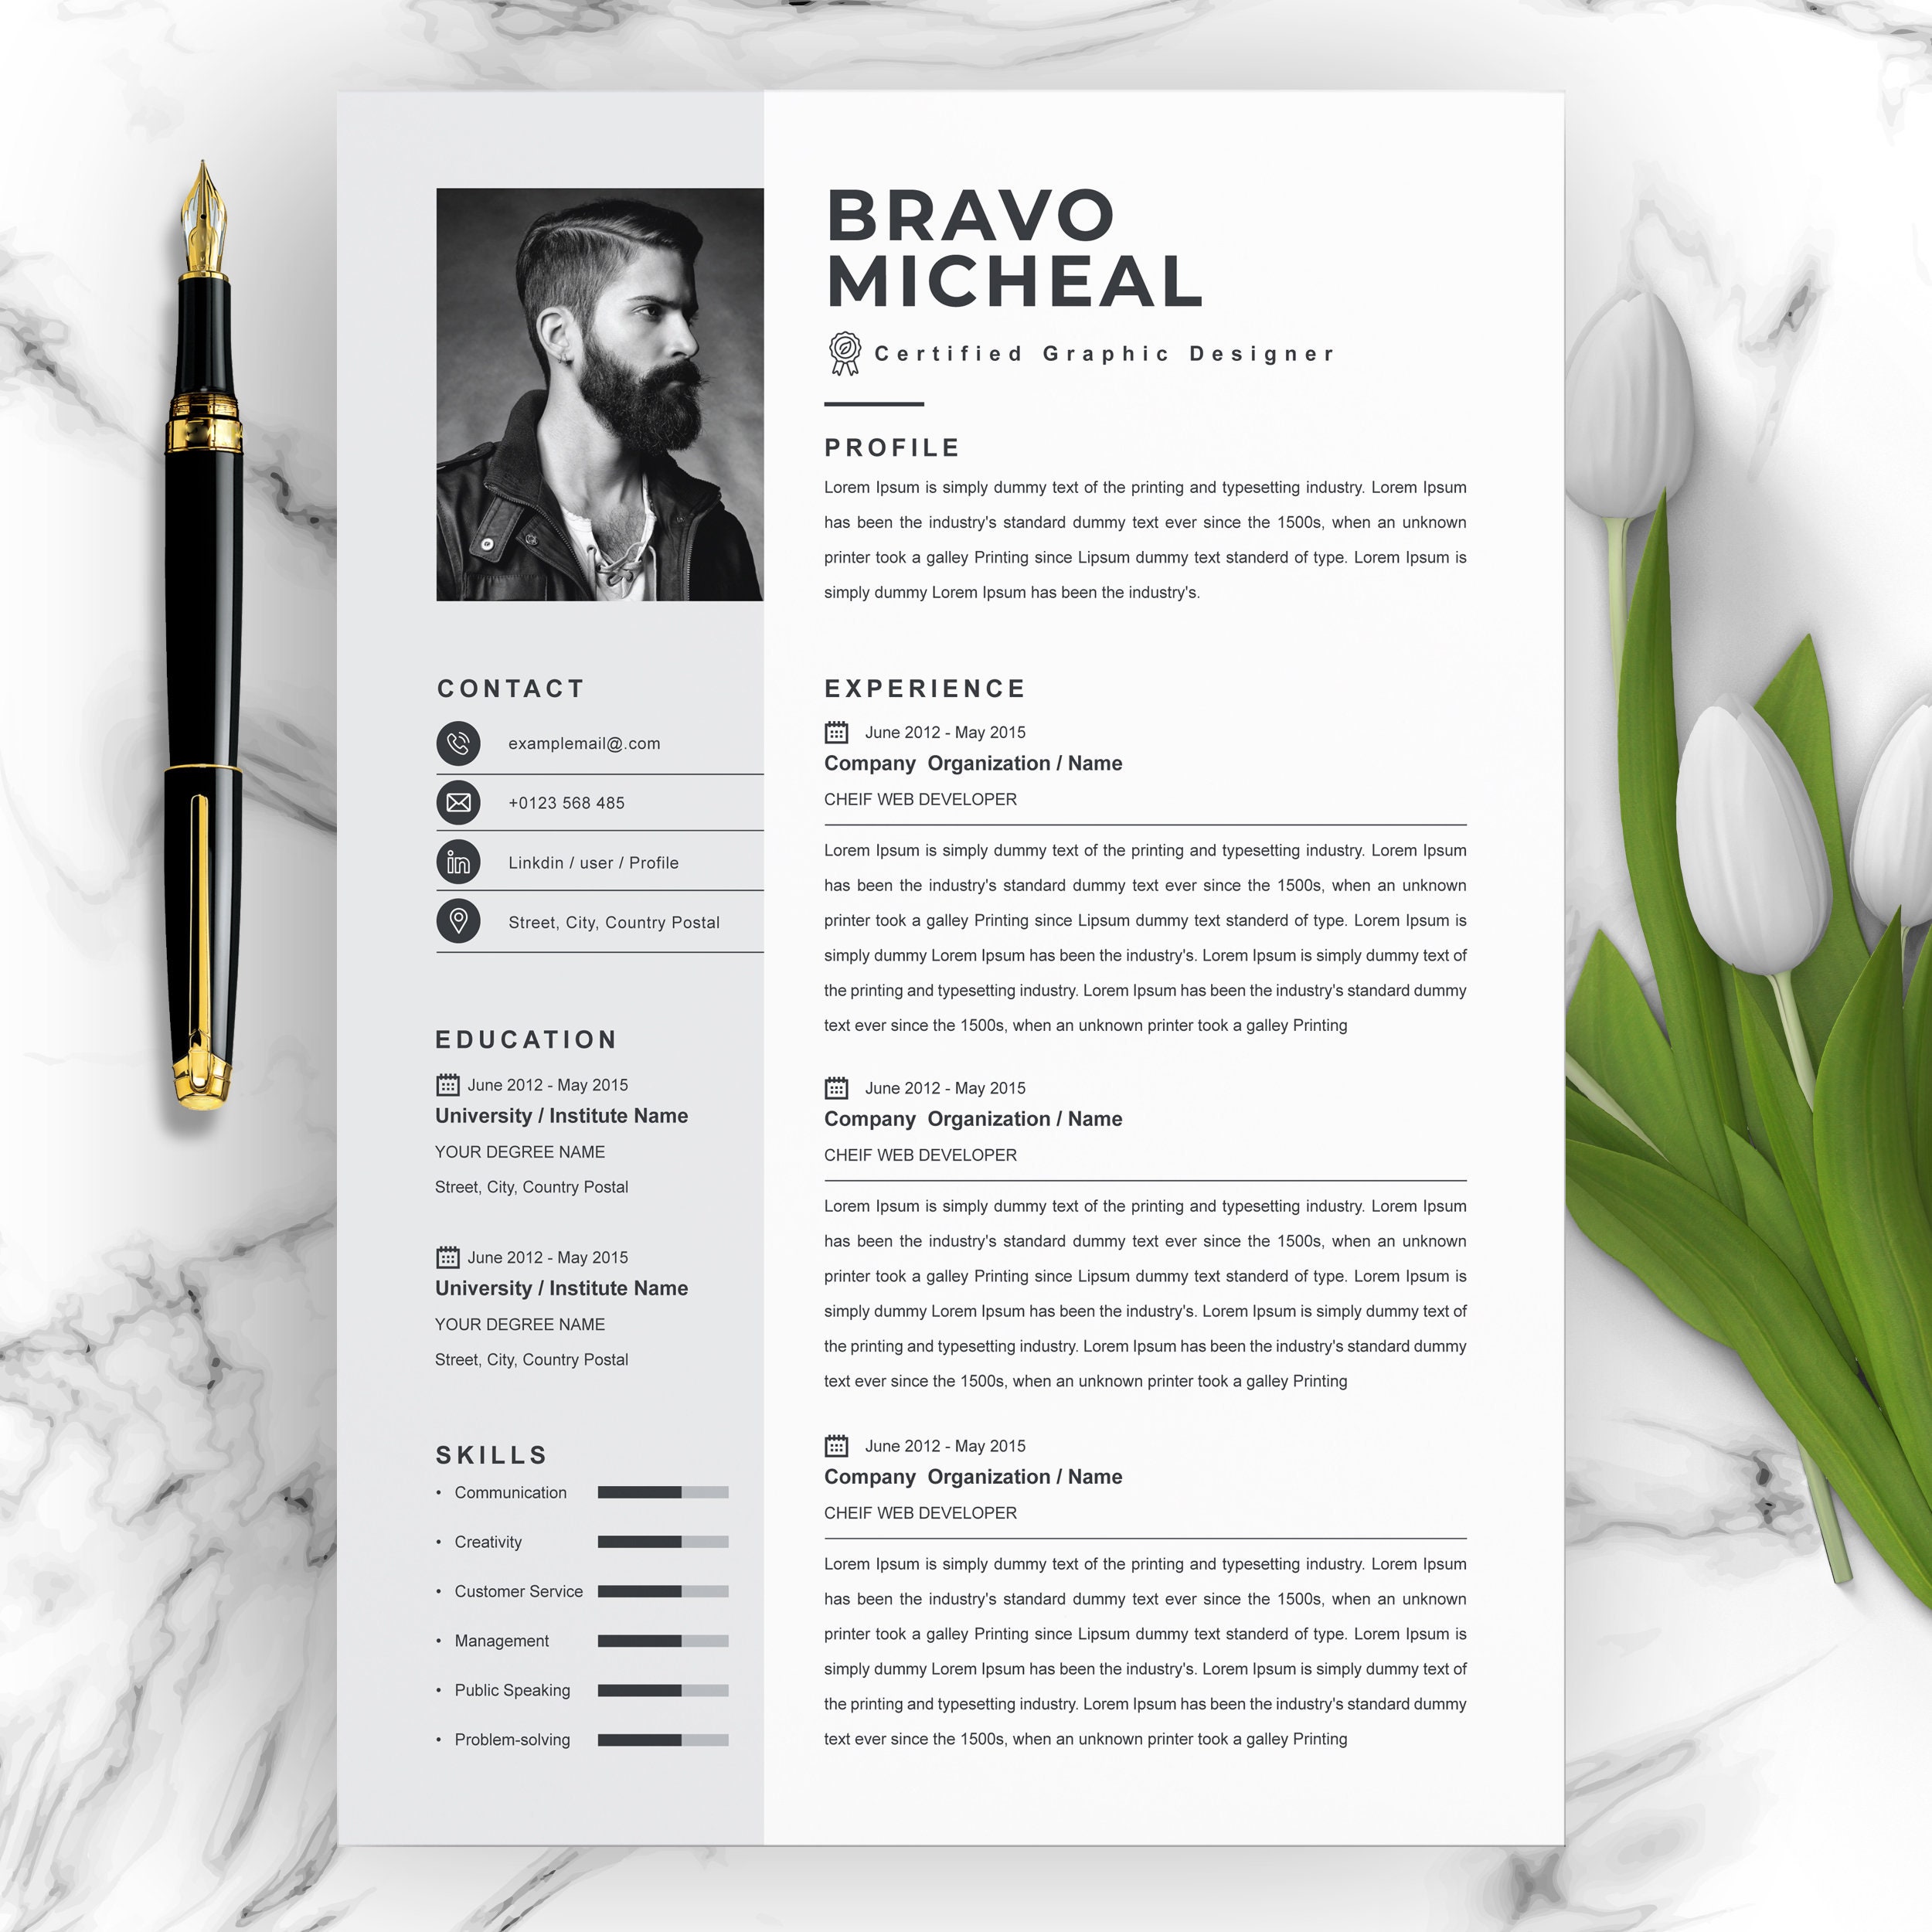 CV Resume Template With Photo, Paper Stationery, CV Template, Modern  Resume, CV Design, Curriculum Vitae, Cover Letter, Professional Resume 